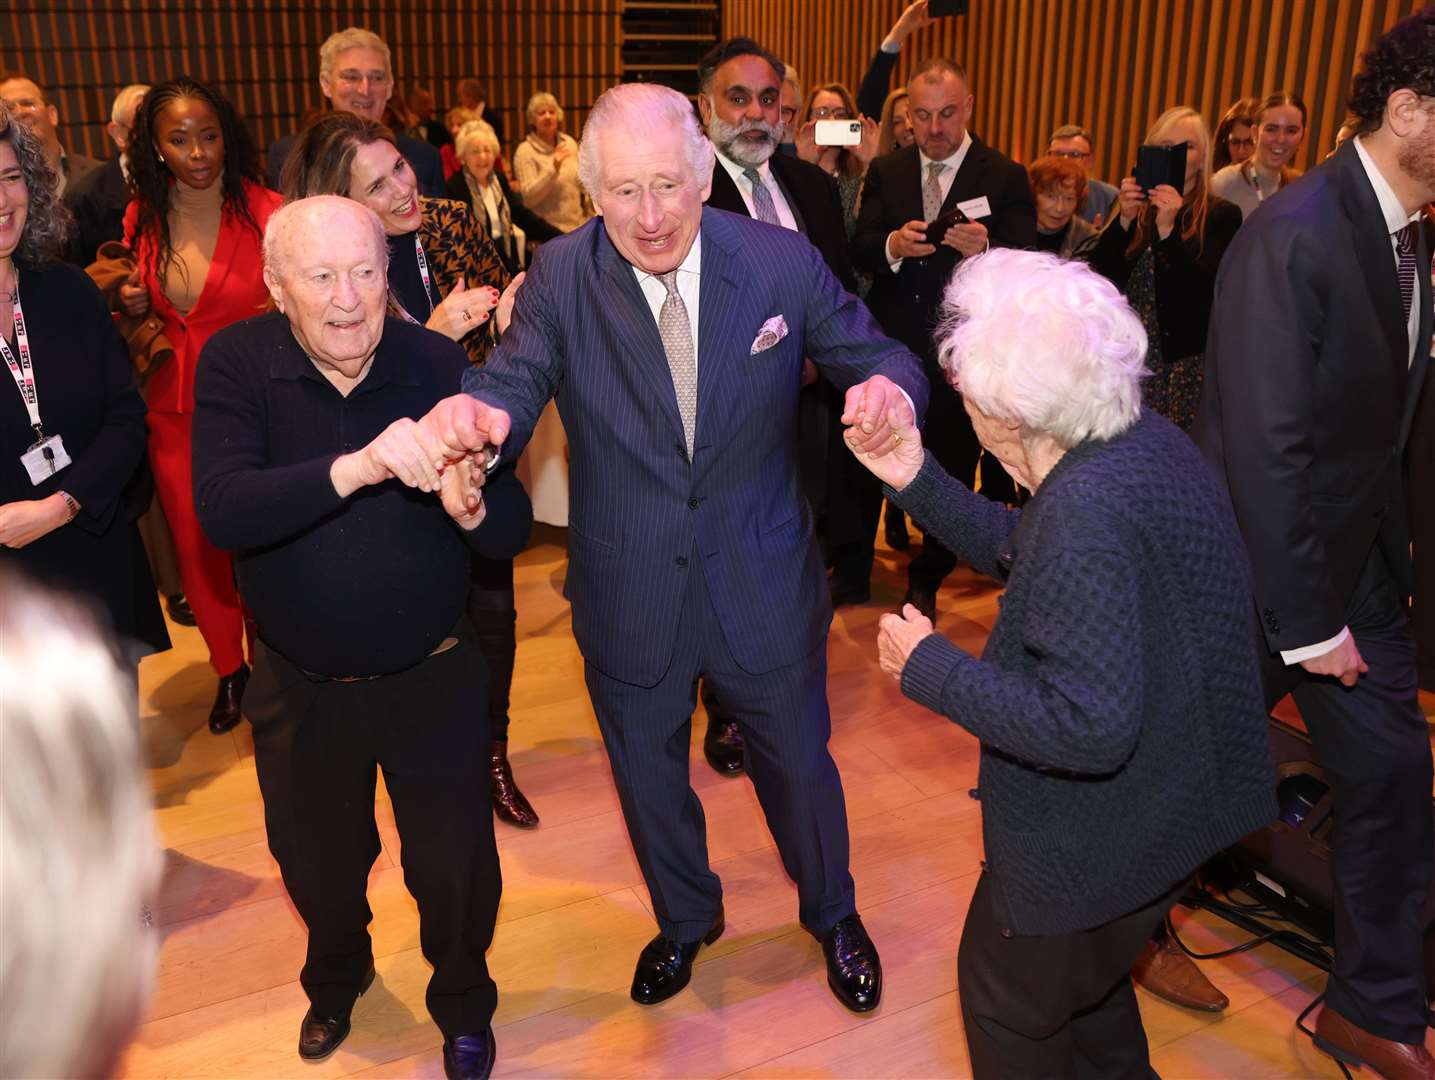 The King dancing during a visit to the JW3 Jewish community centre in London (Ian Vogler/Daily Mirror/PA)